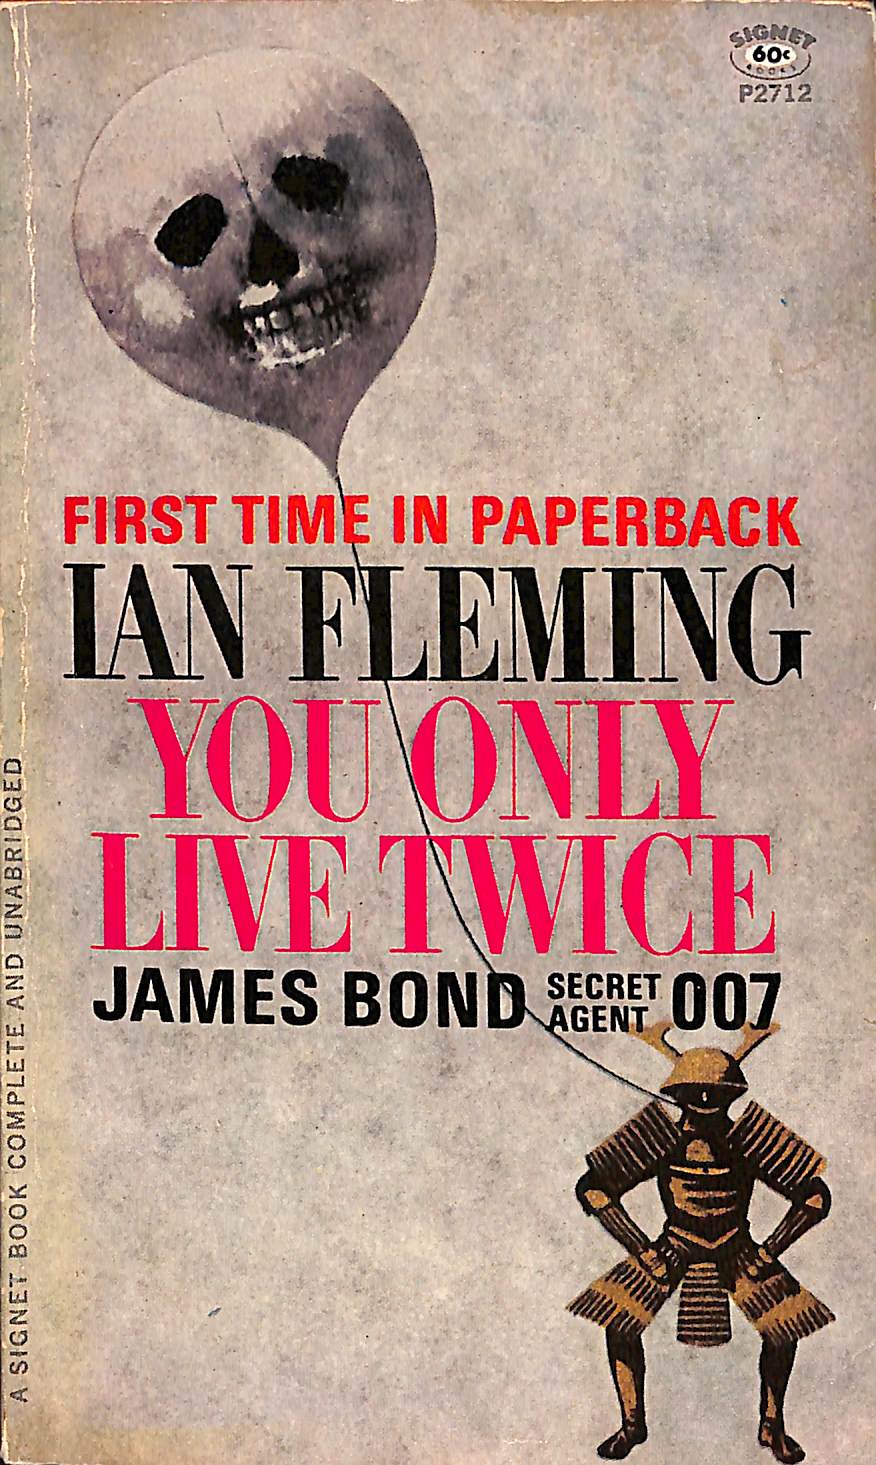 "You Only Live Twice" 1965 FLEMING, Ian